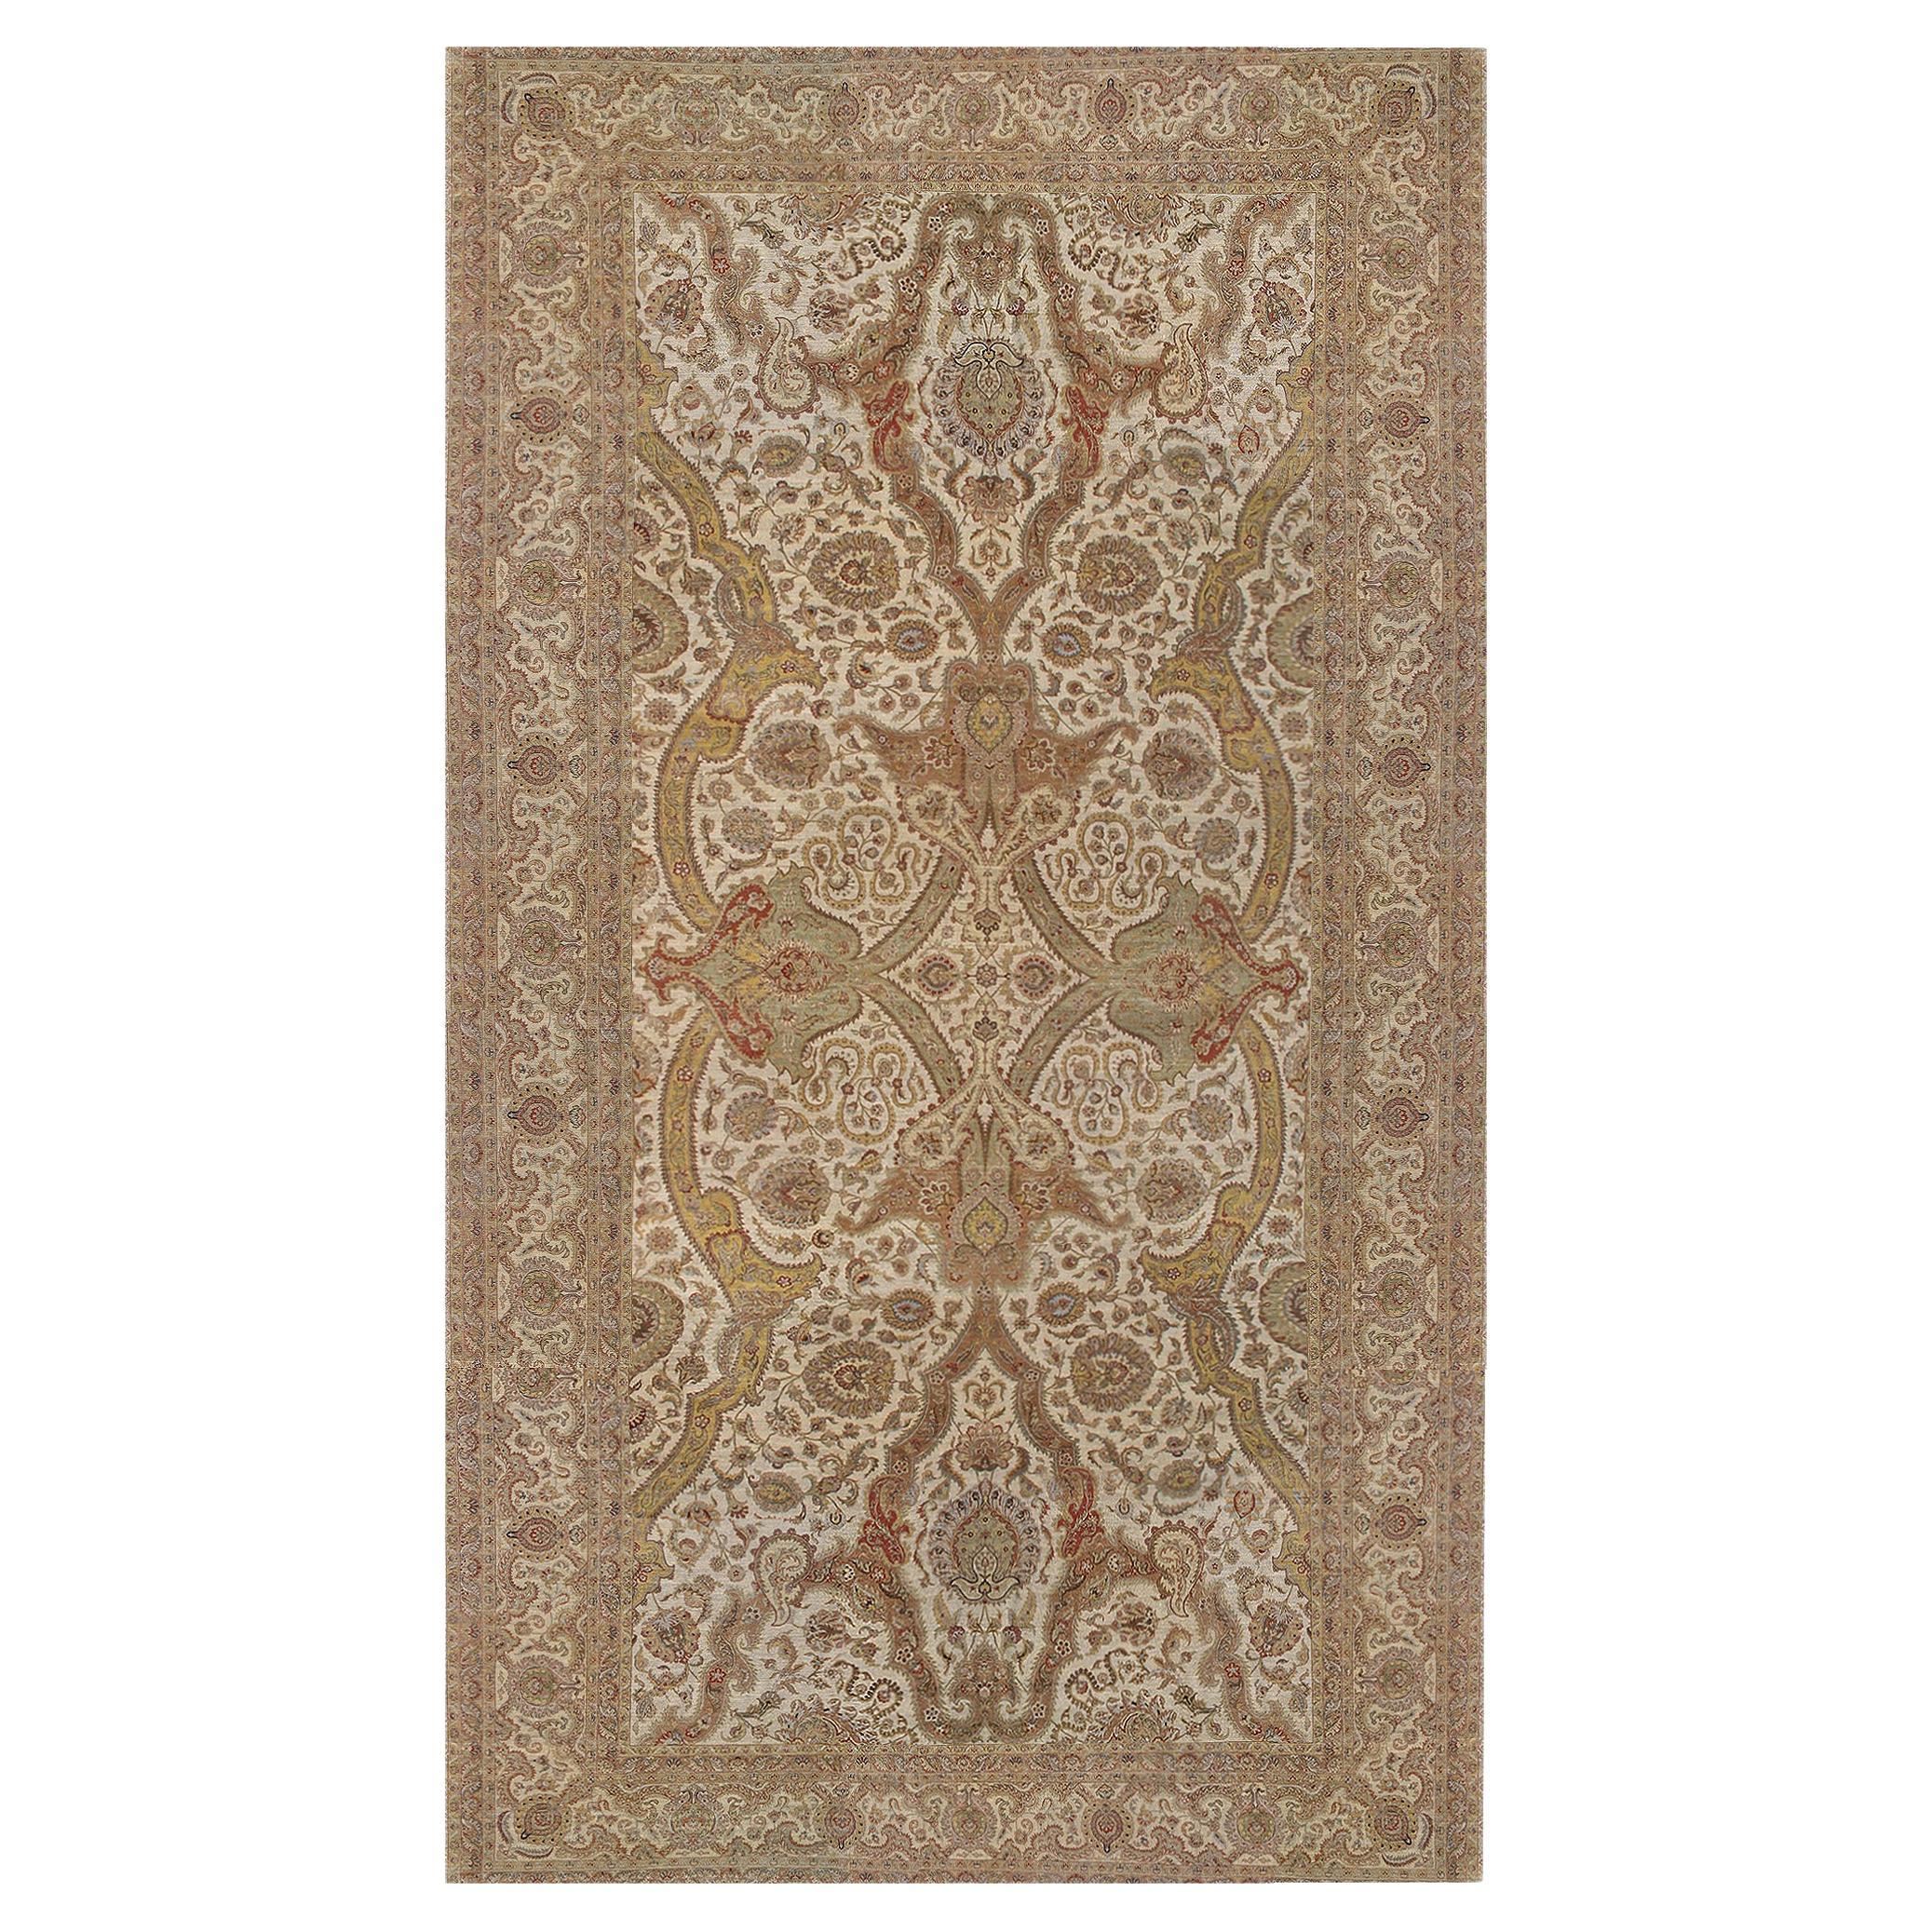 Traditional Handwoven Luxury Wool Ivory / Gold Area Rug